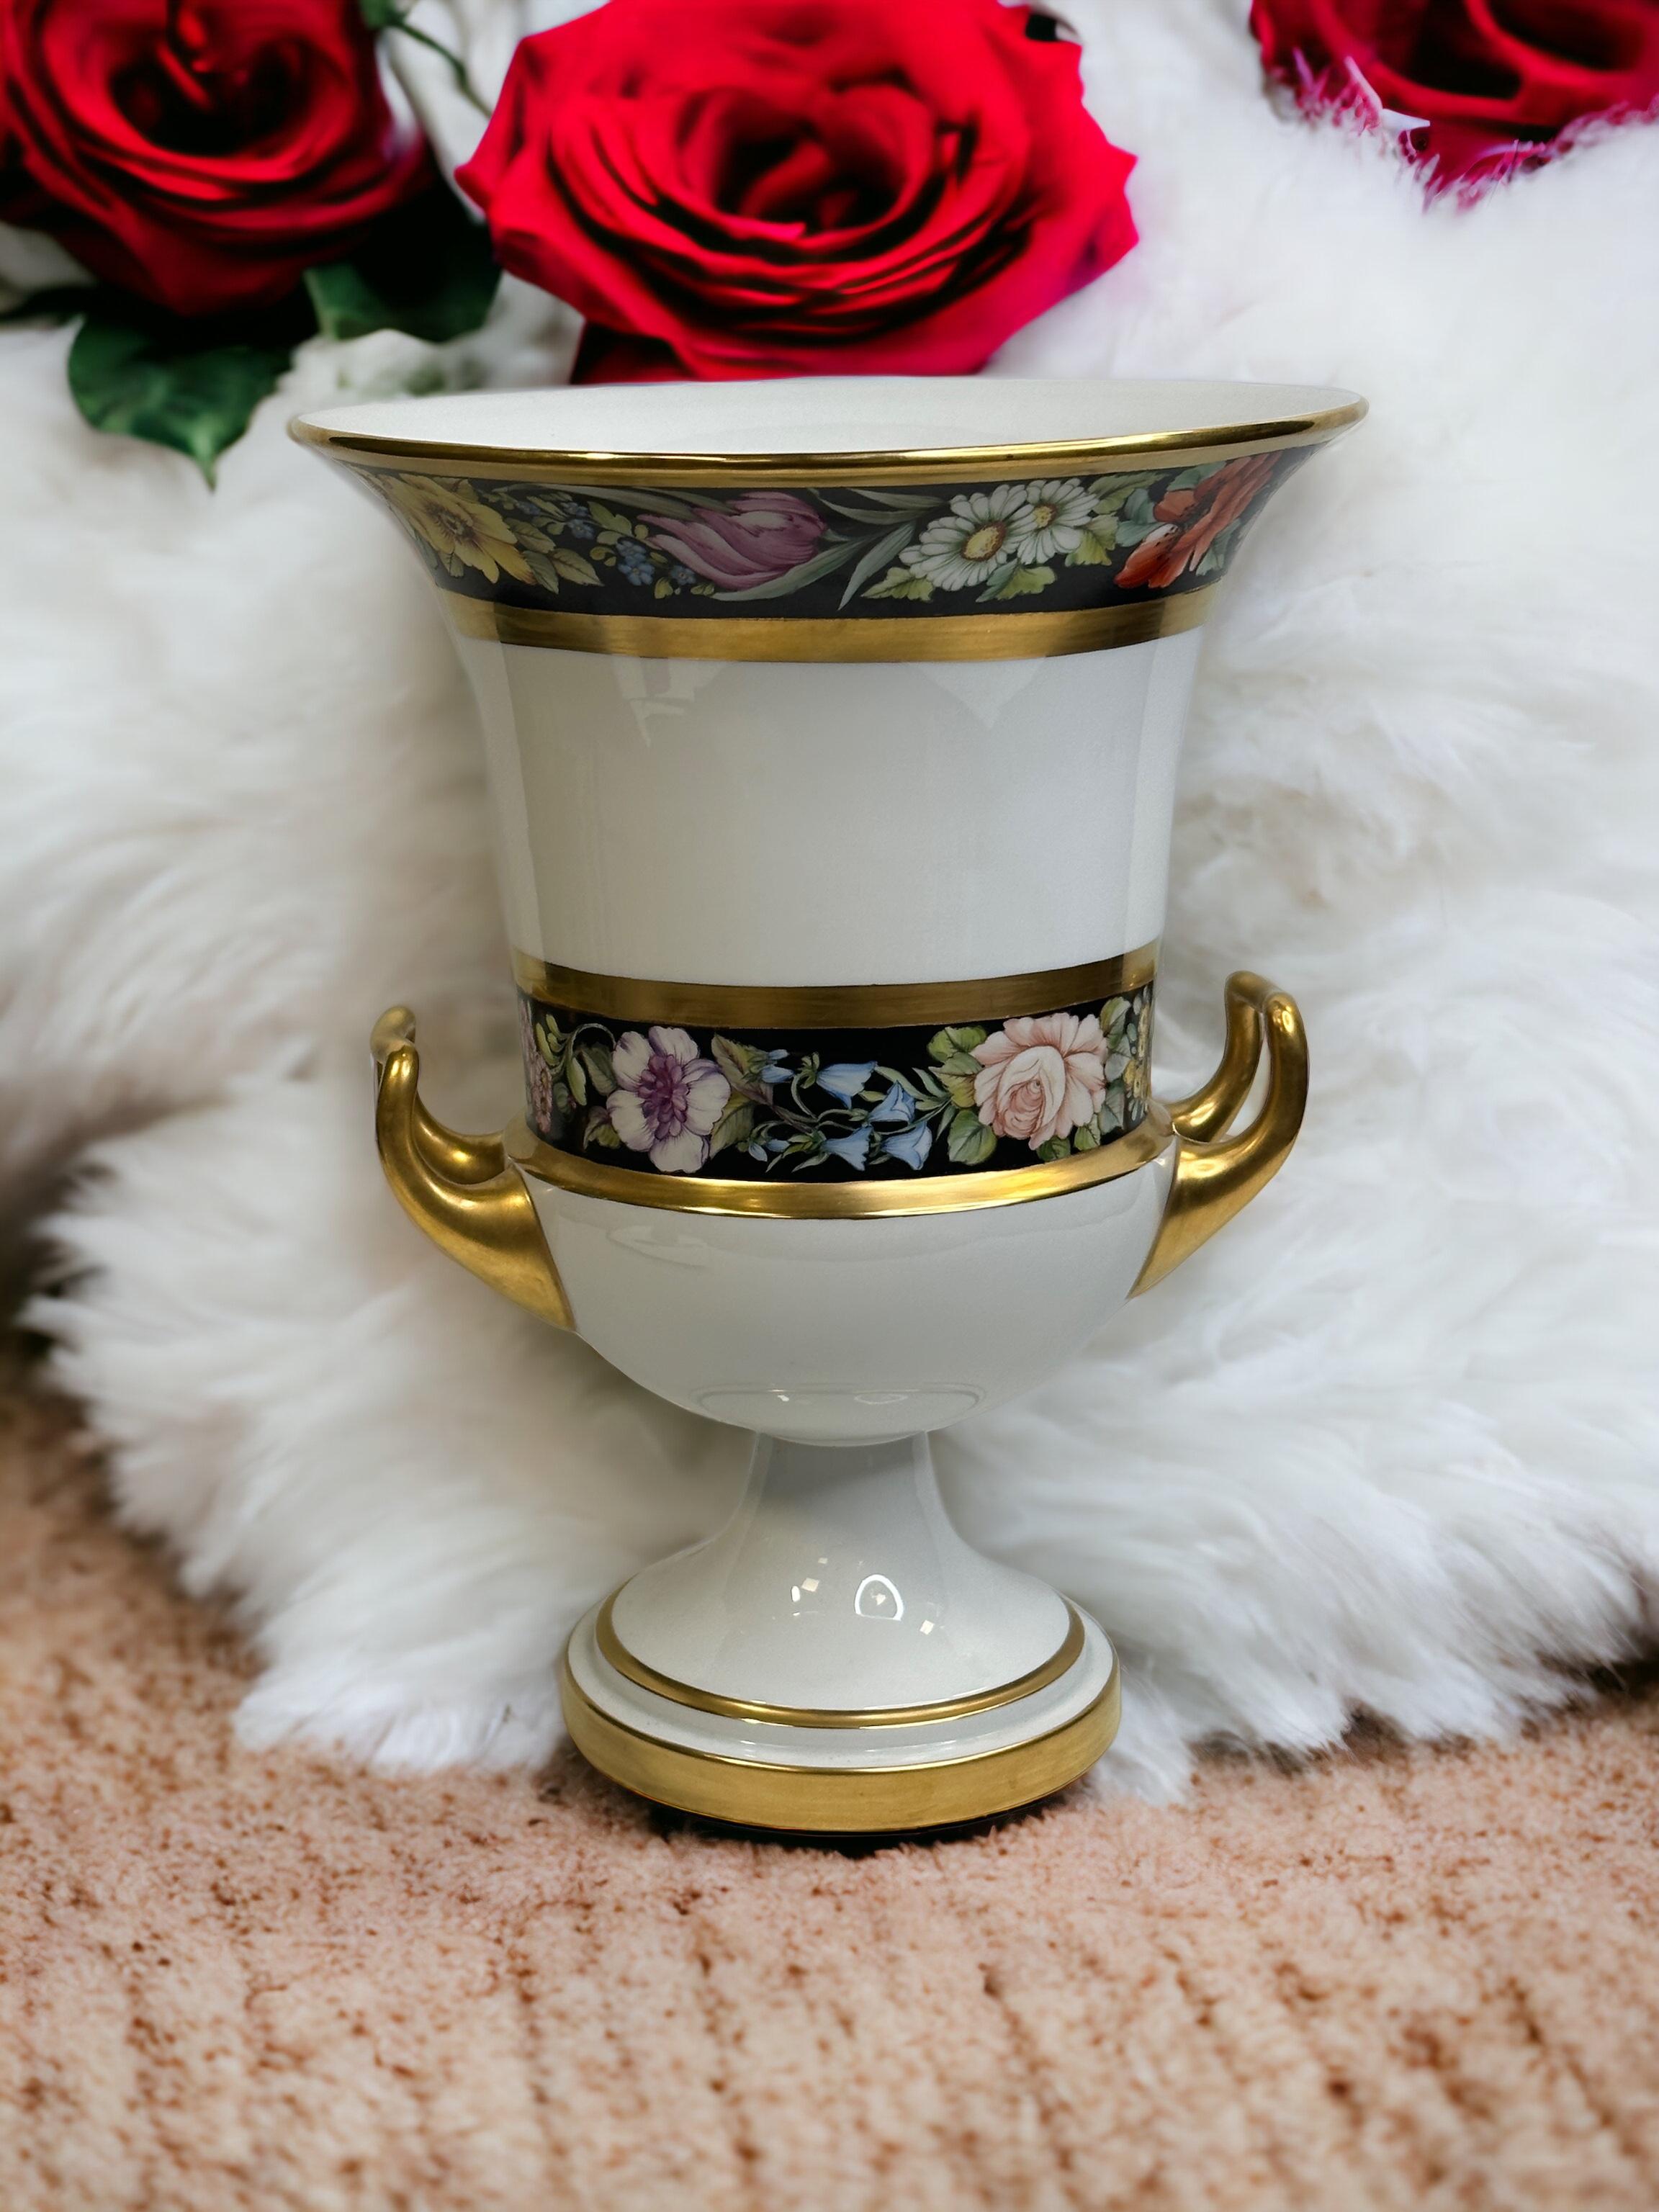 An amazing glazed hand painted urn vase made in Germany by Furstenberg Porcelain, a well known Manufactory for extraordinary items. This is a heavy vase but you can also use it as a sculpture. Vase is in very good condition with no chips, cracks, or